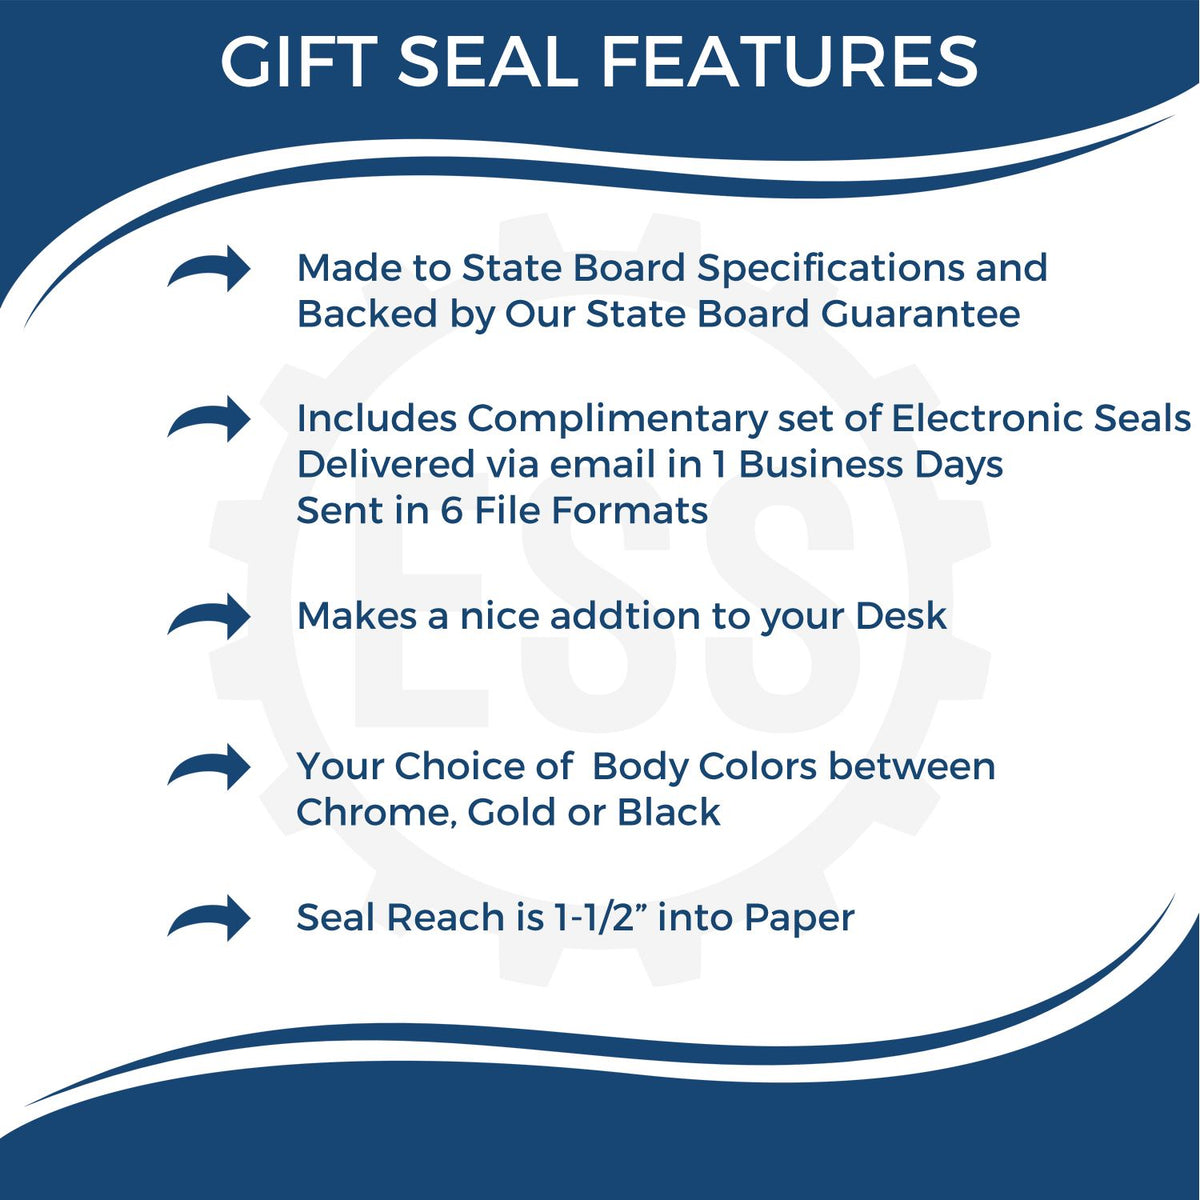 A picture of an infographic highlighting the selling points for the Gift Alaska Engineer Seal